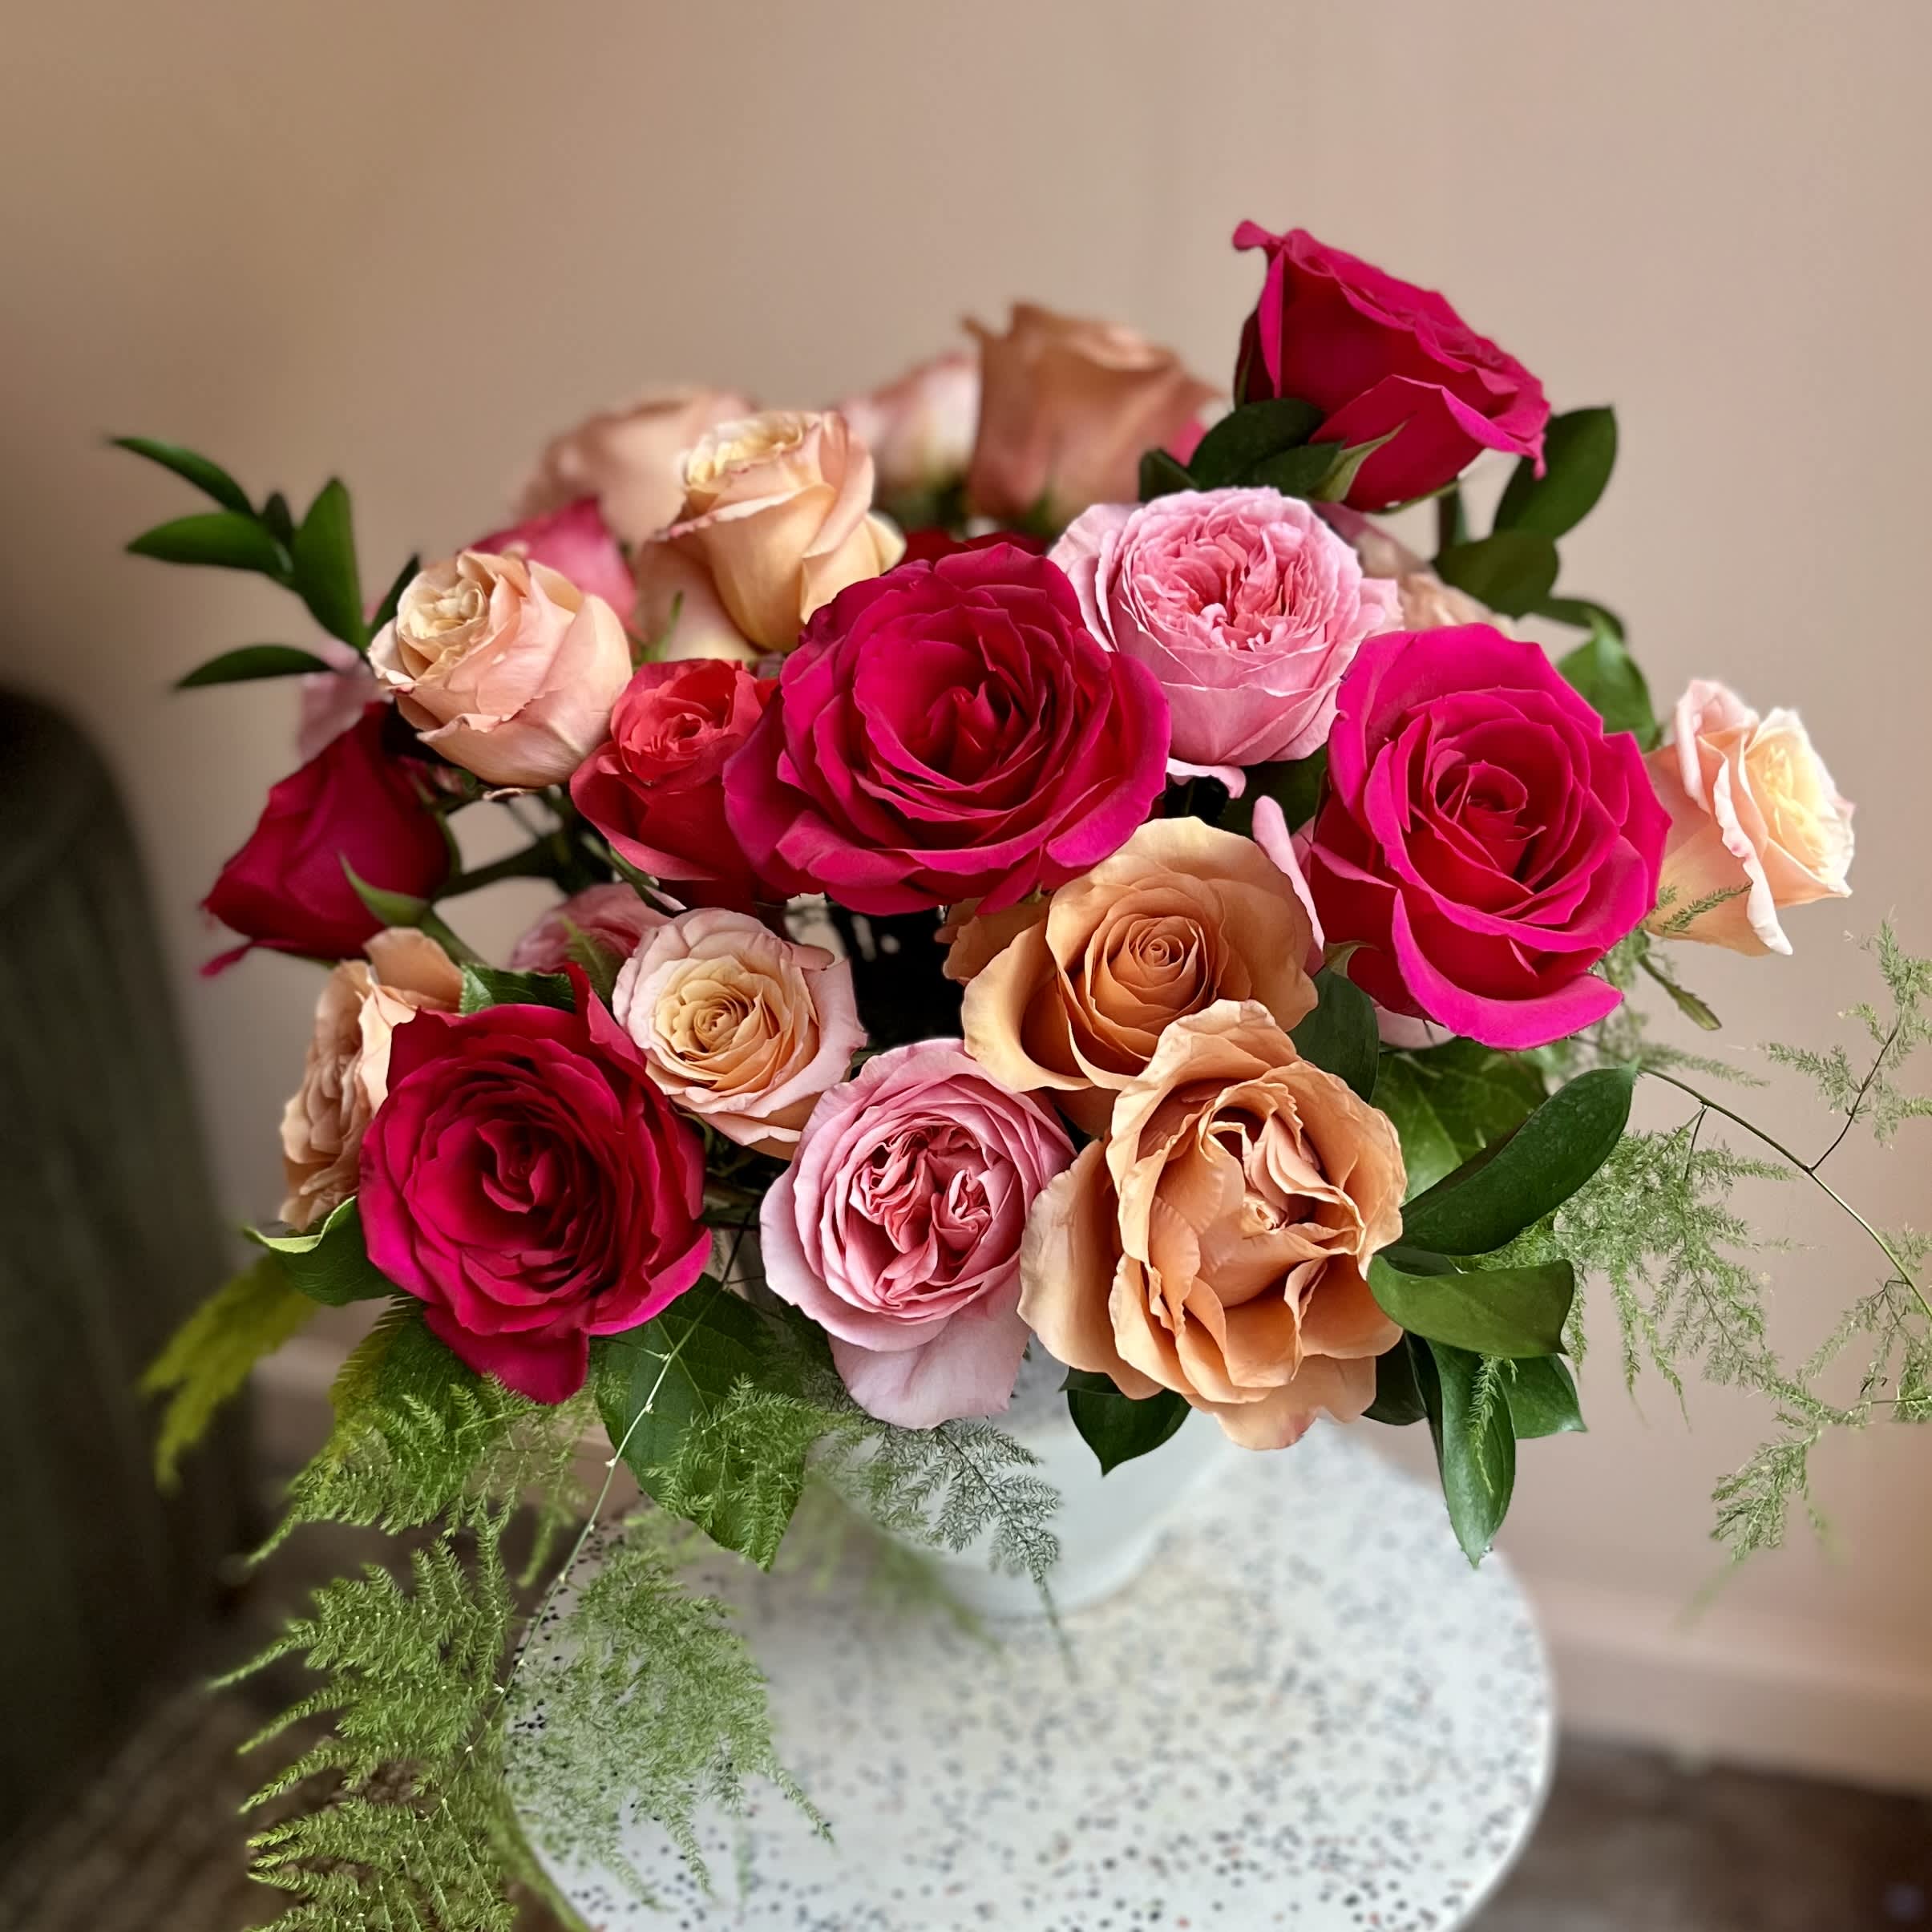 Carried Away - 30 amazing roses in ombre shades of blush, peach and coral designed in a lovely vase. A staff favorite!!  